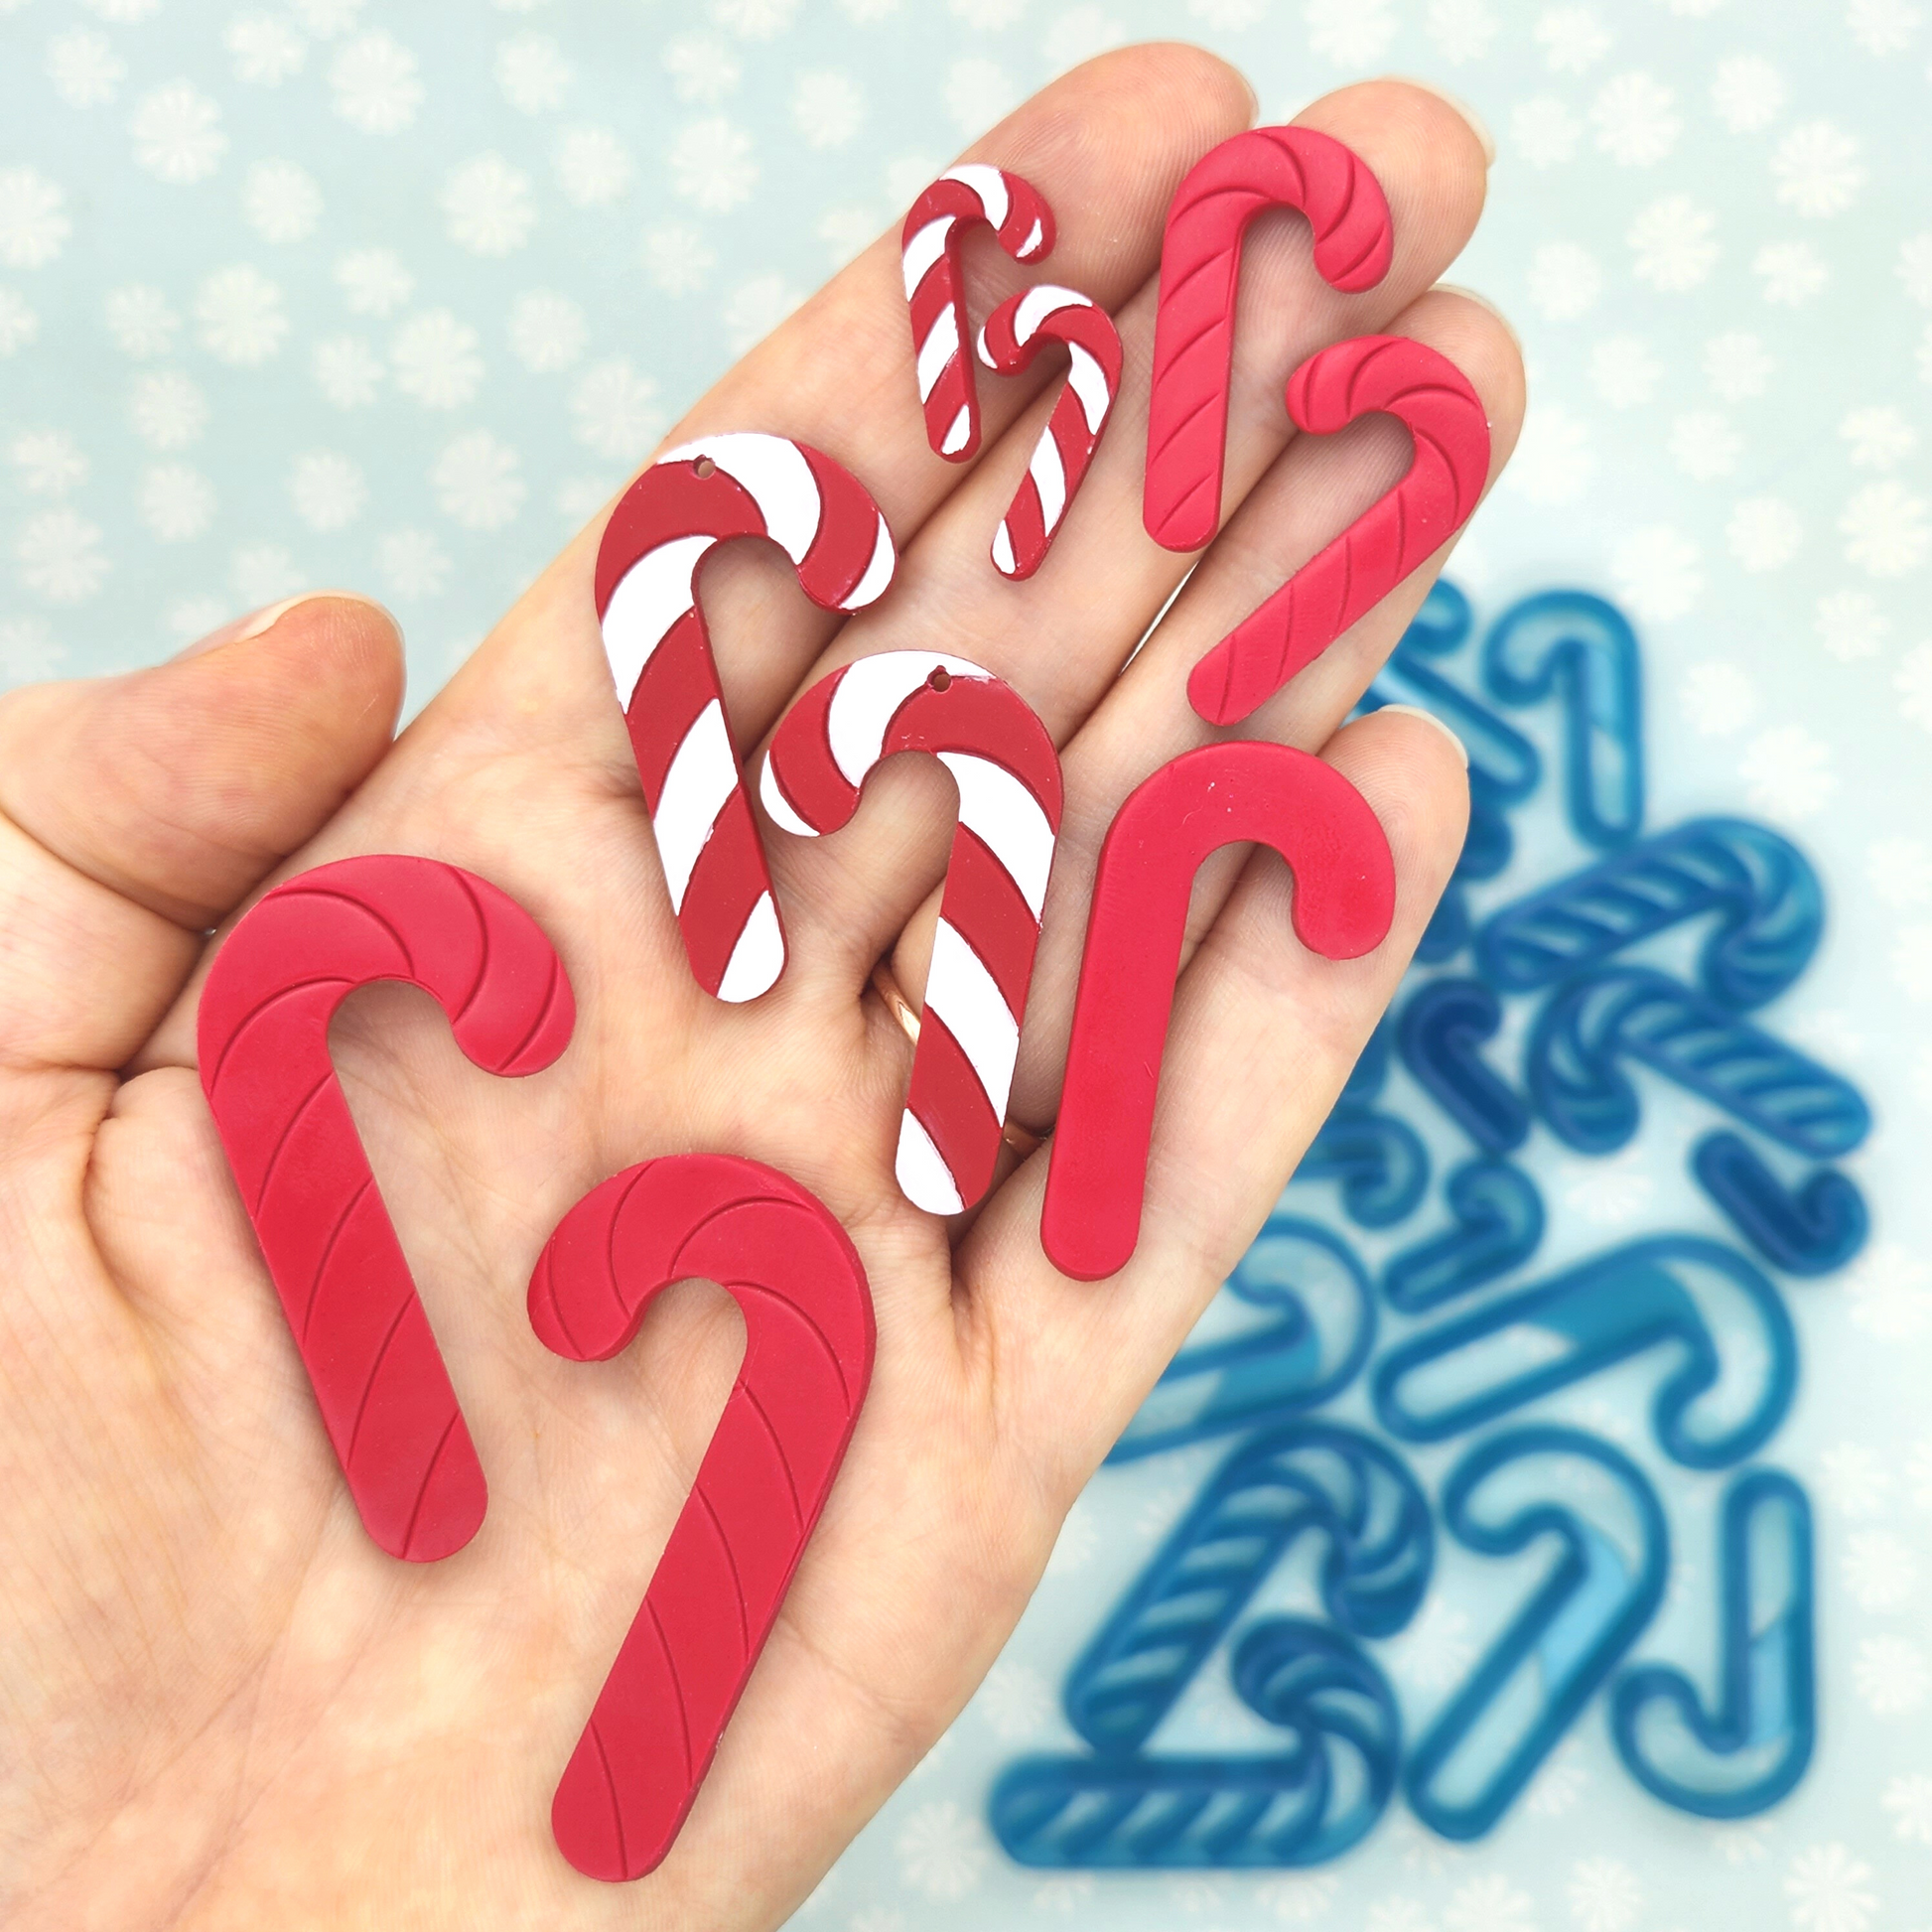 Candy Cane Polymer Clay Designs for Earrings and Jewelry Making, Charms, and Ornaments